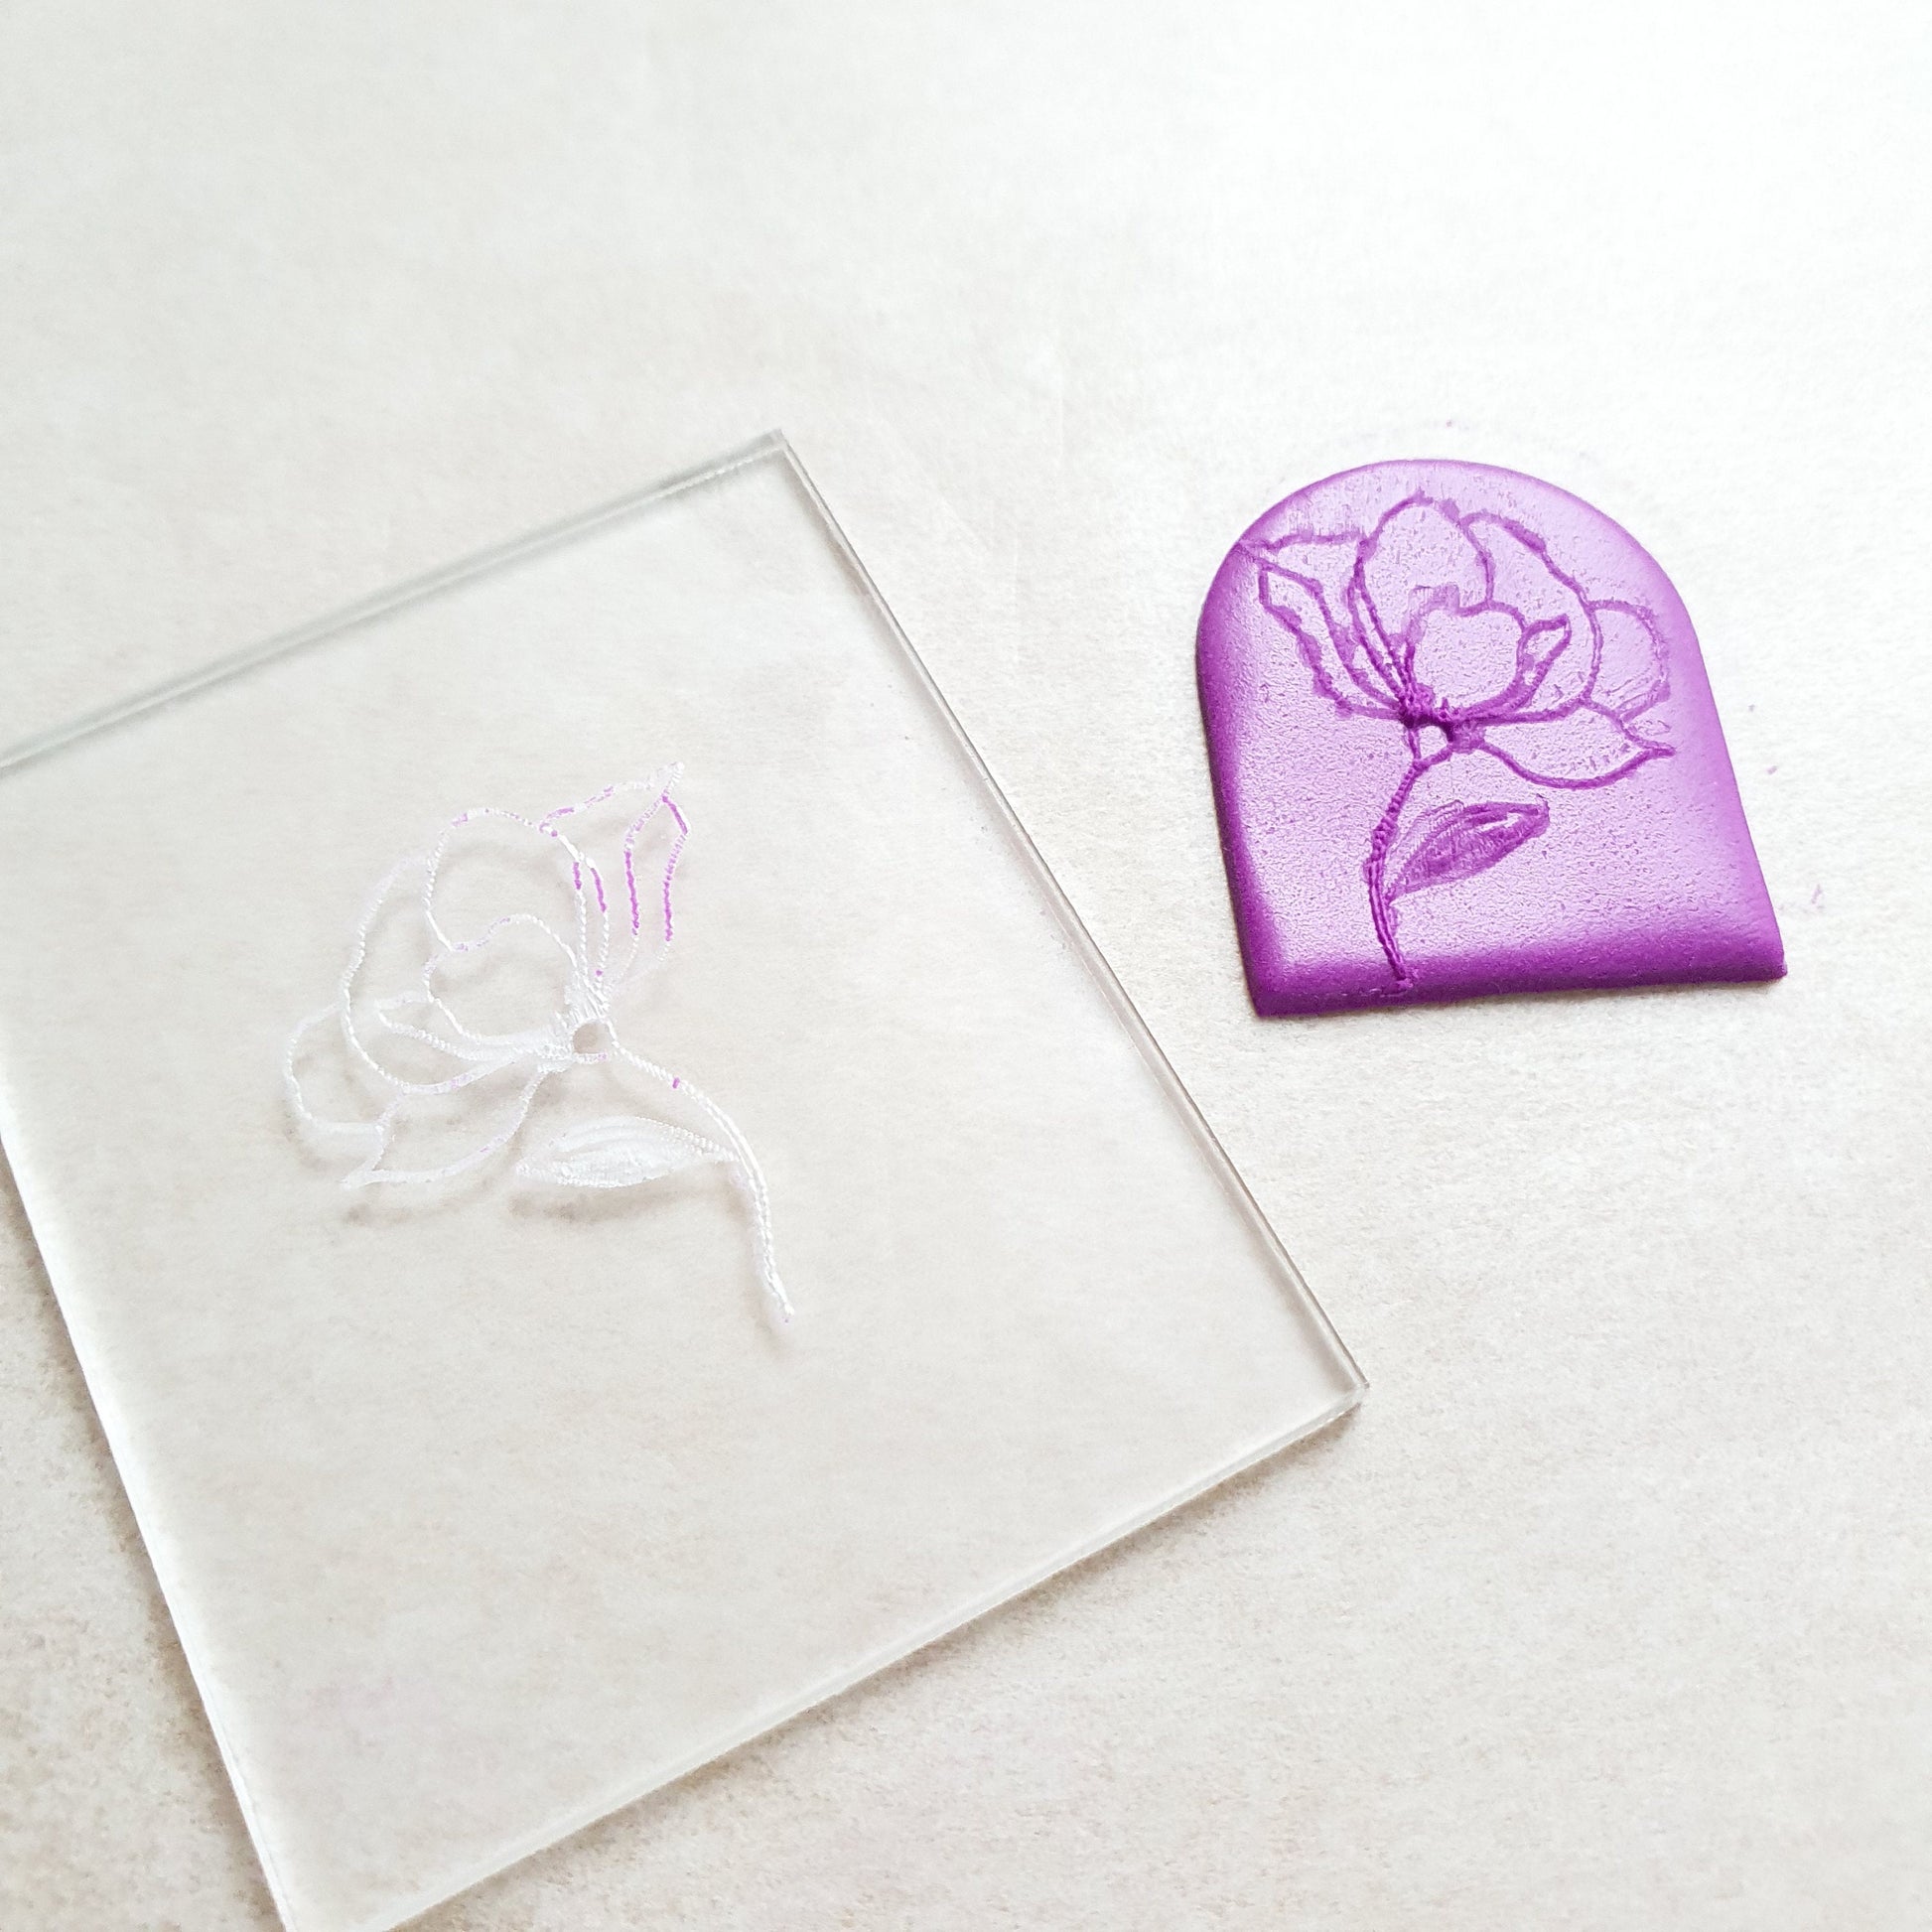 Embossing stamp for polymer clay "Poppy" Floral texture plate Flower debossing stamp Acrylic stamps - Luxy Kraft